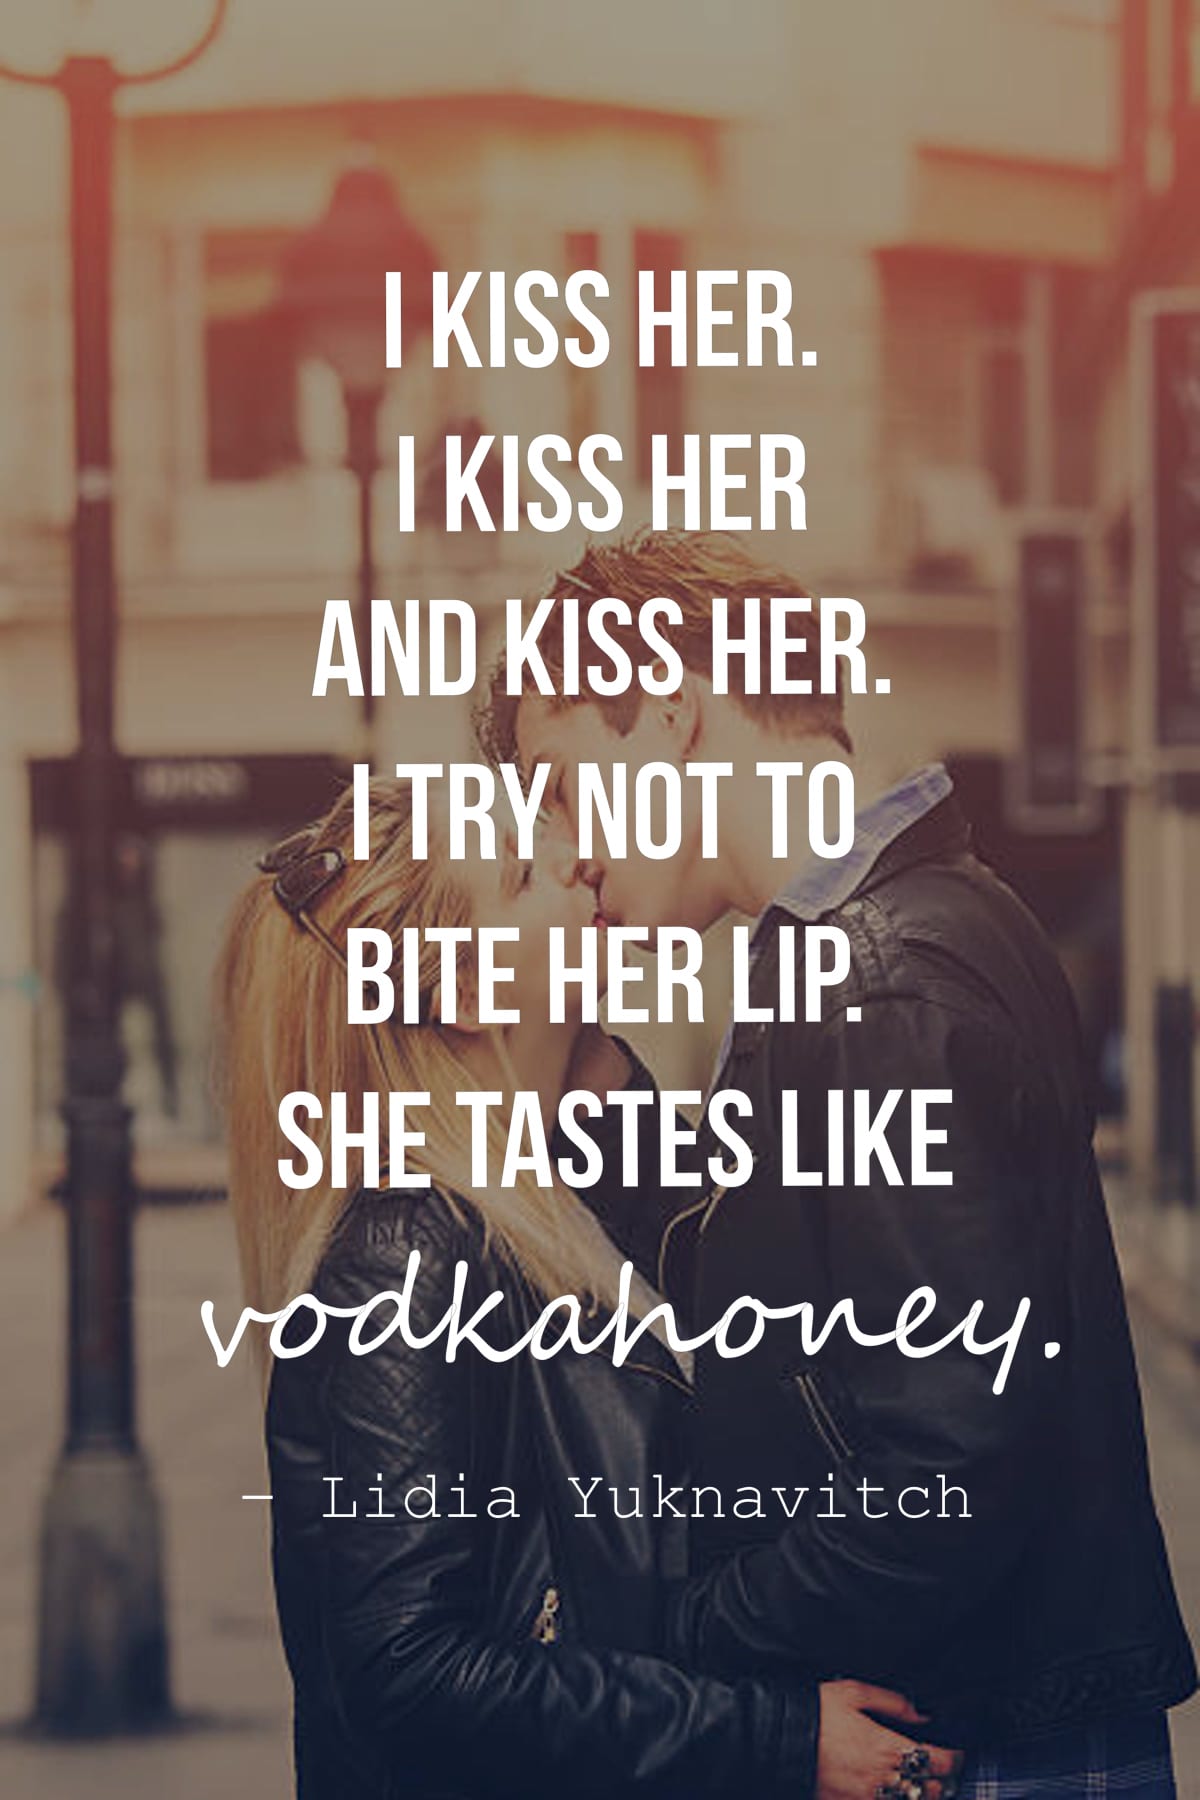 I kiss her. I kiss her and kiss her. I try not to bite her lip. She tastes like vodkahoney.